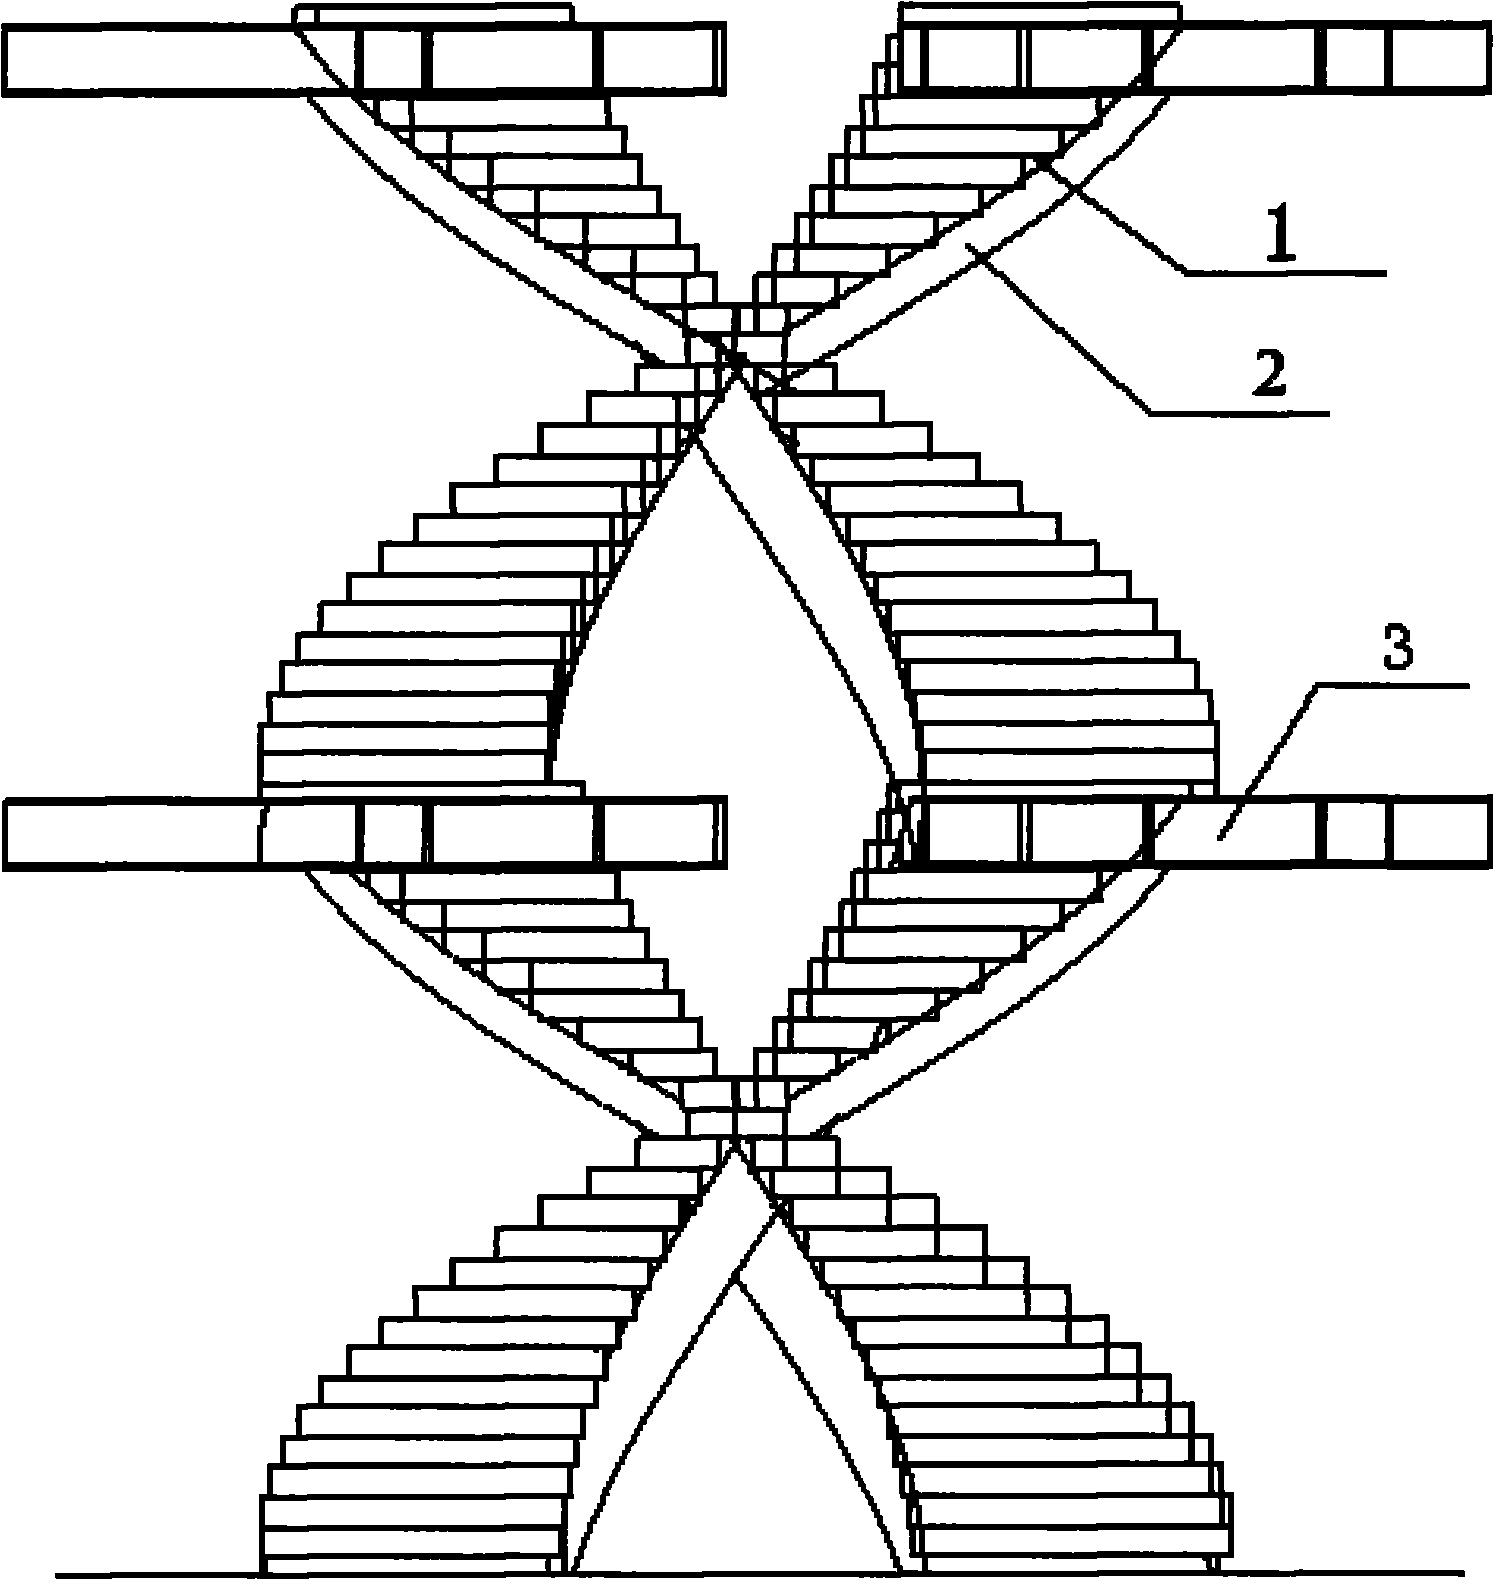 Method for manufacturing double-spiral steel staircase without middle standing pillar